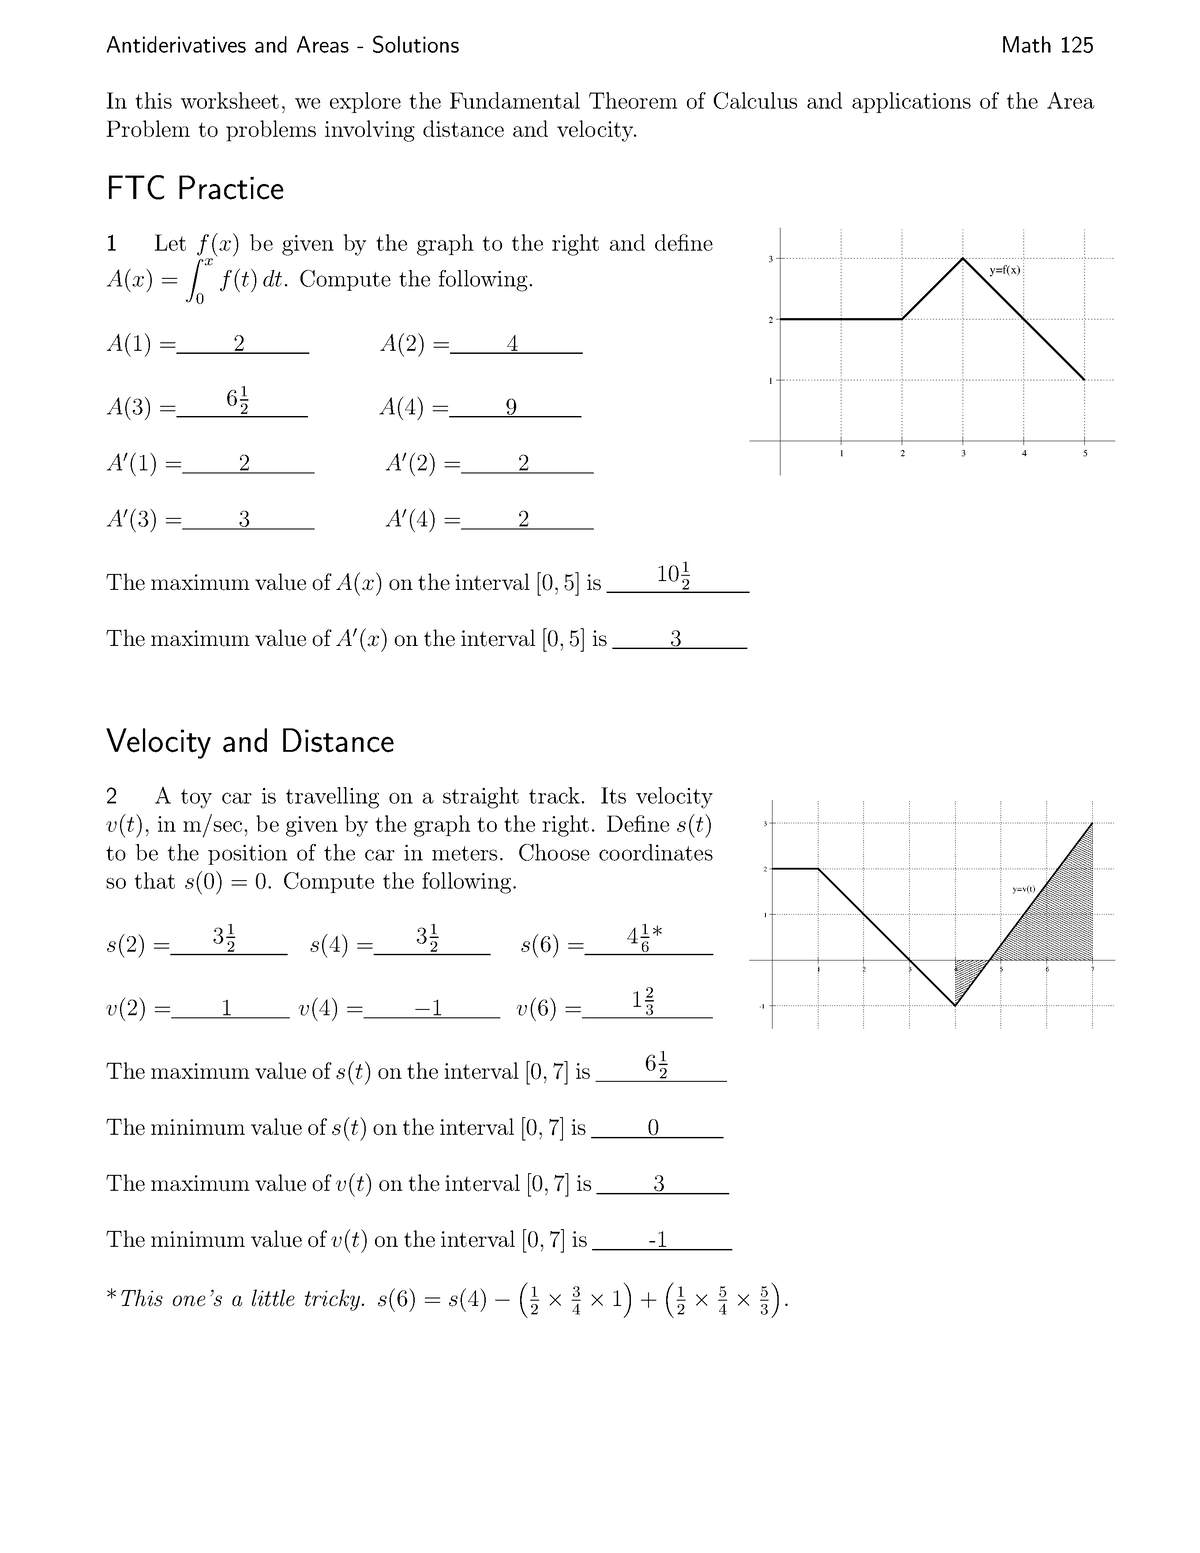 main-125-key-2-worksheet-2-antiderivatives-and-areas-solutions-math-125-in-this-worksheet